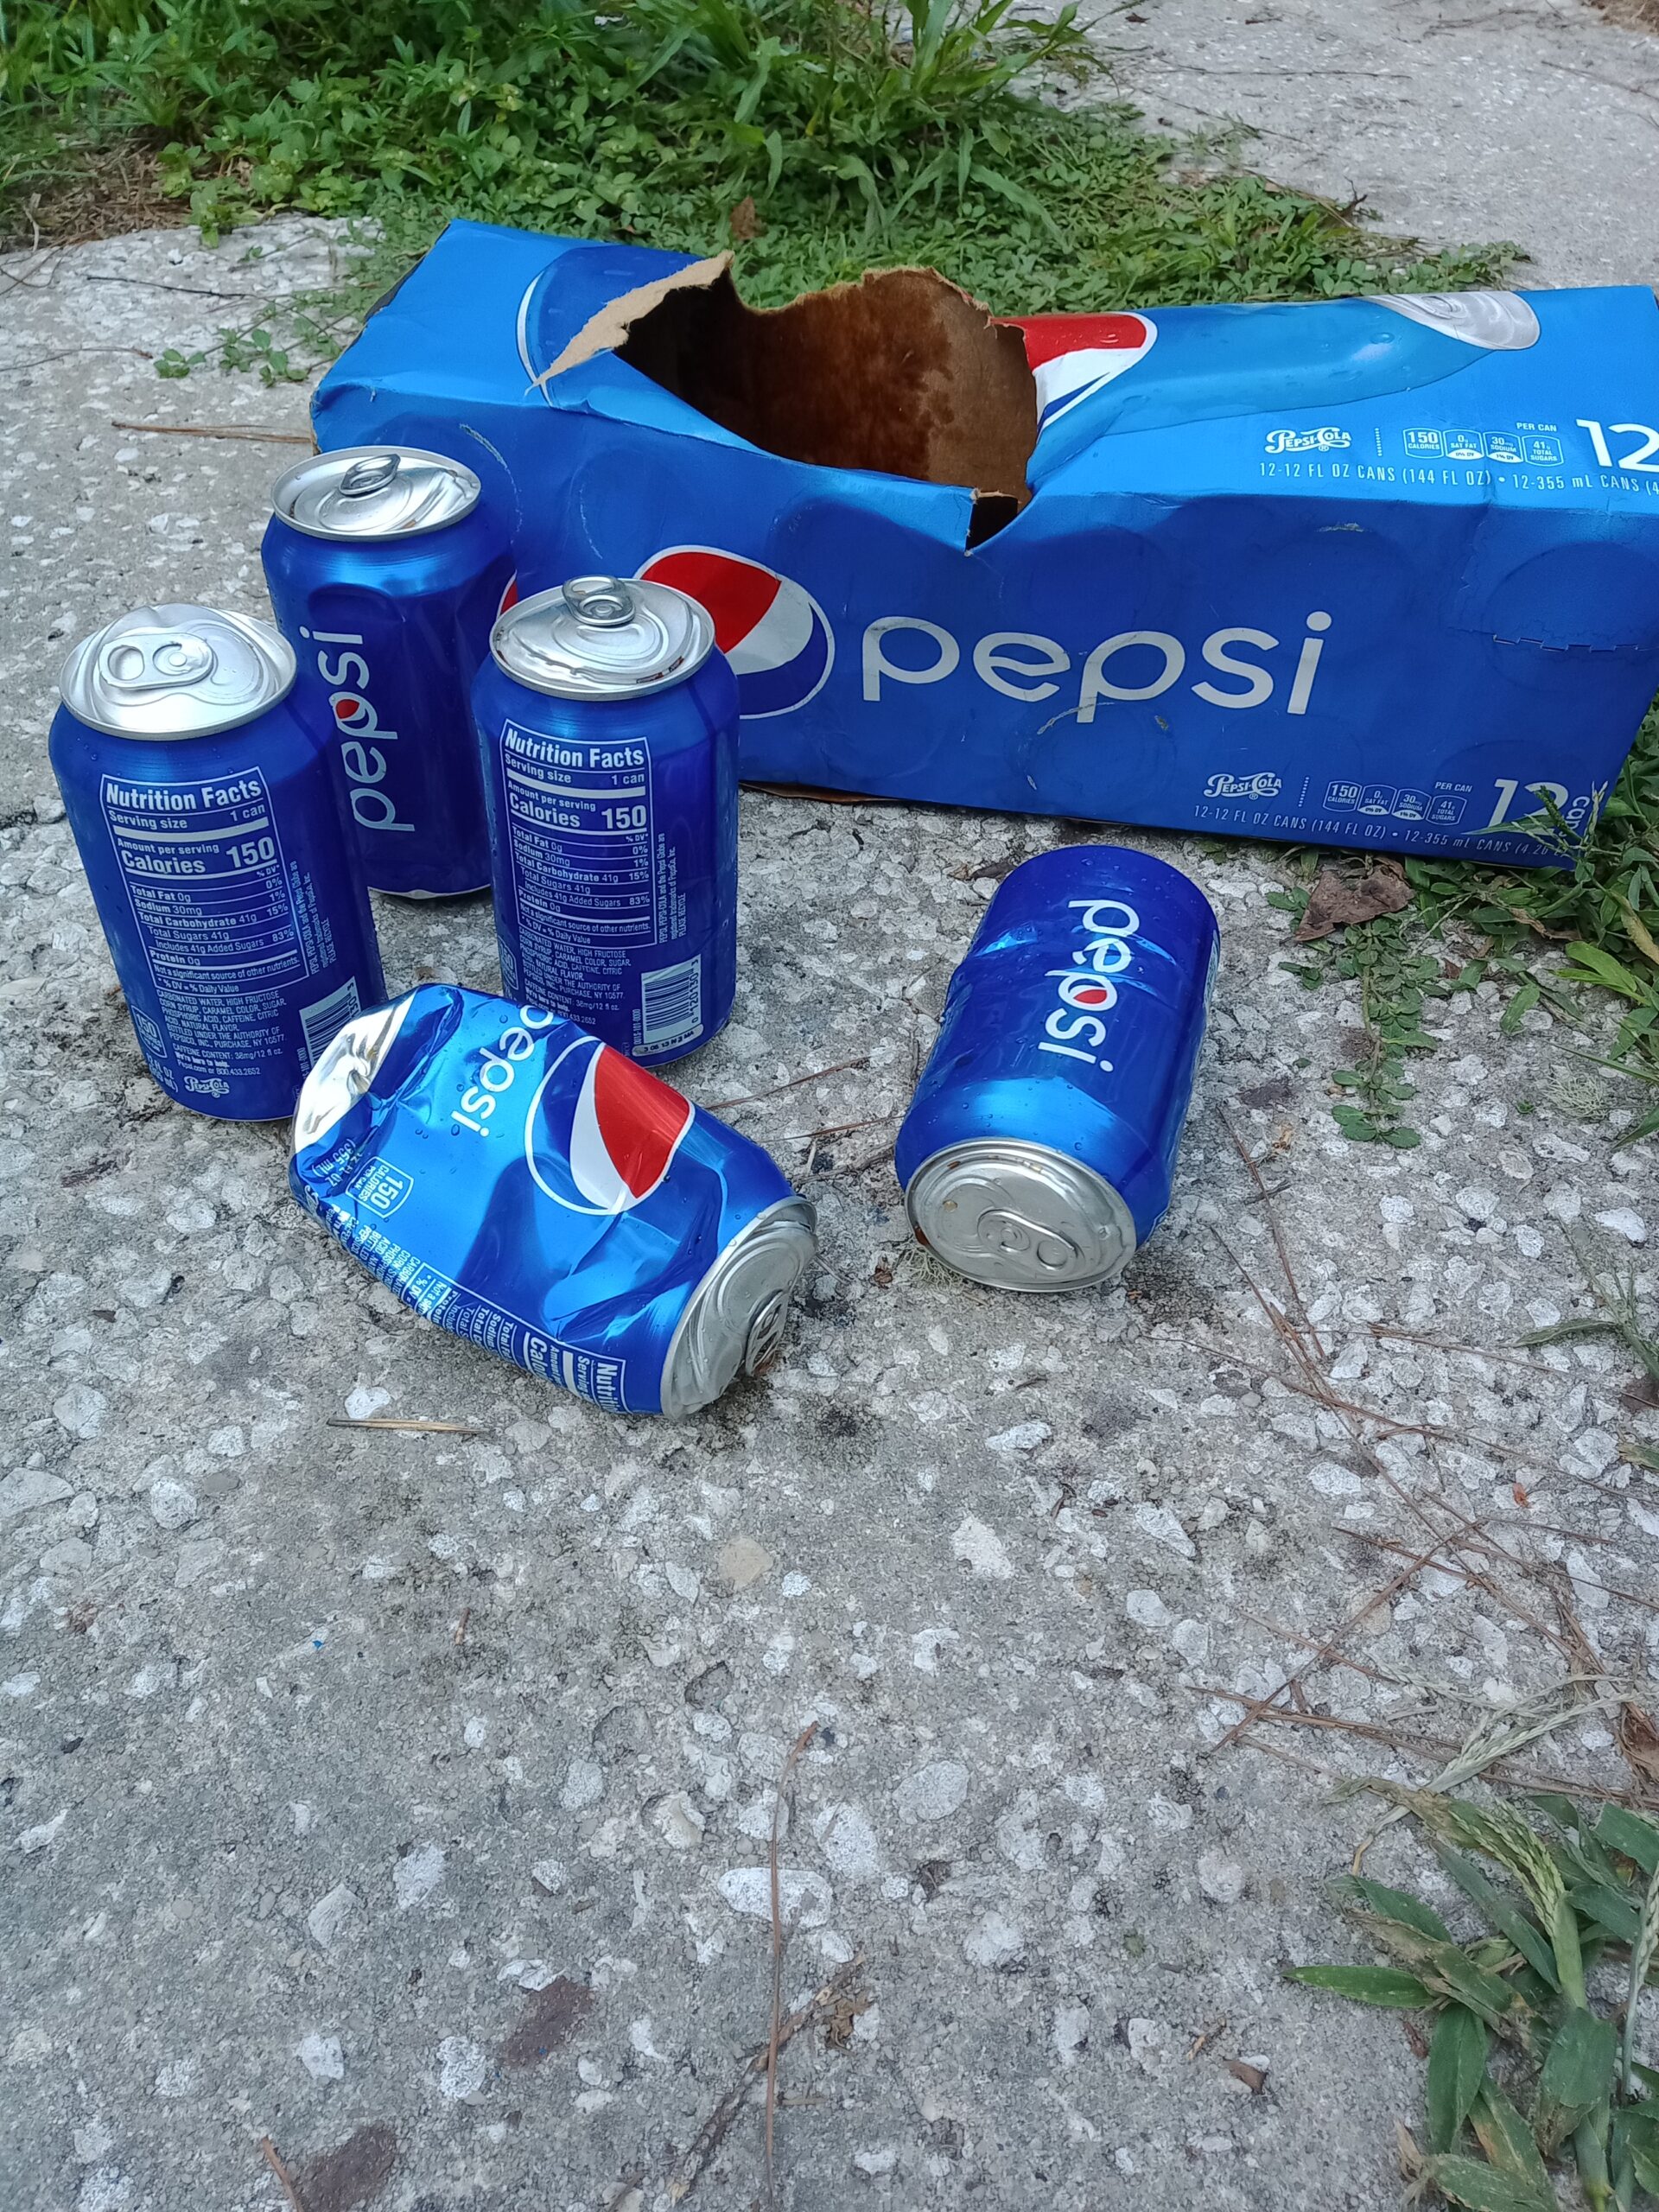 Case was full of broken cans